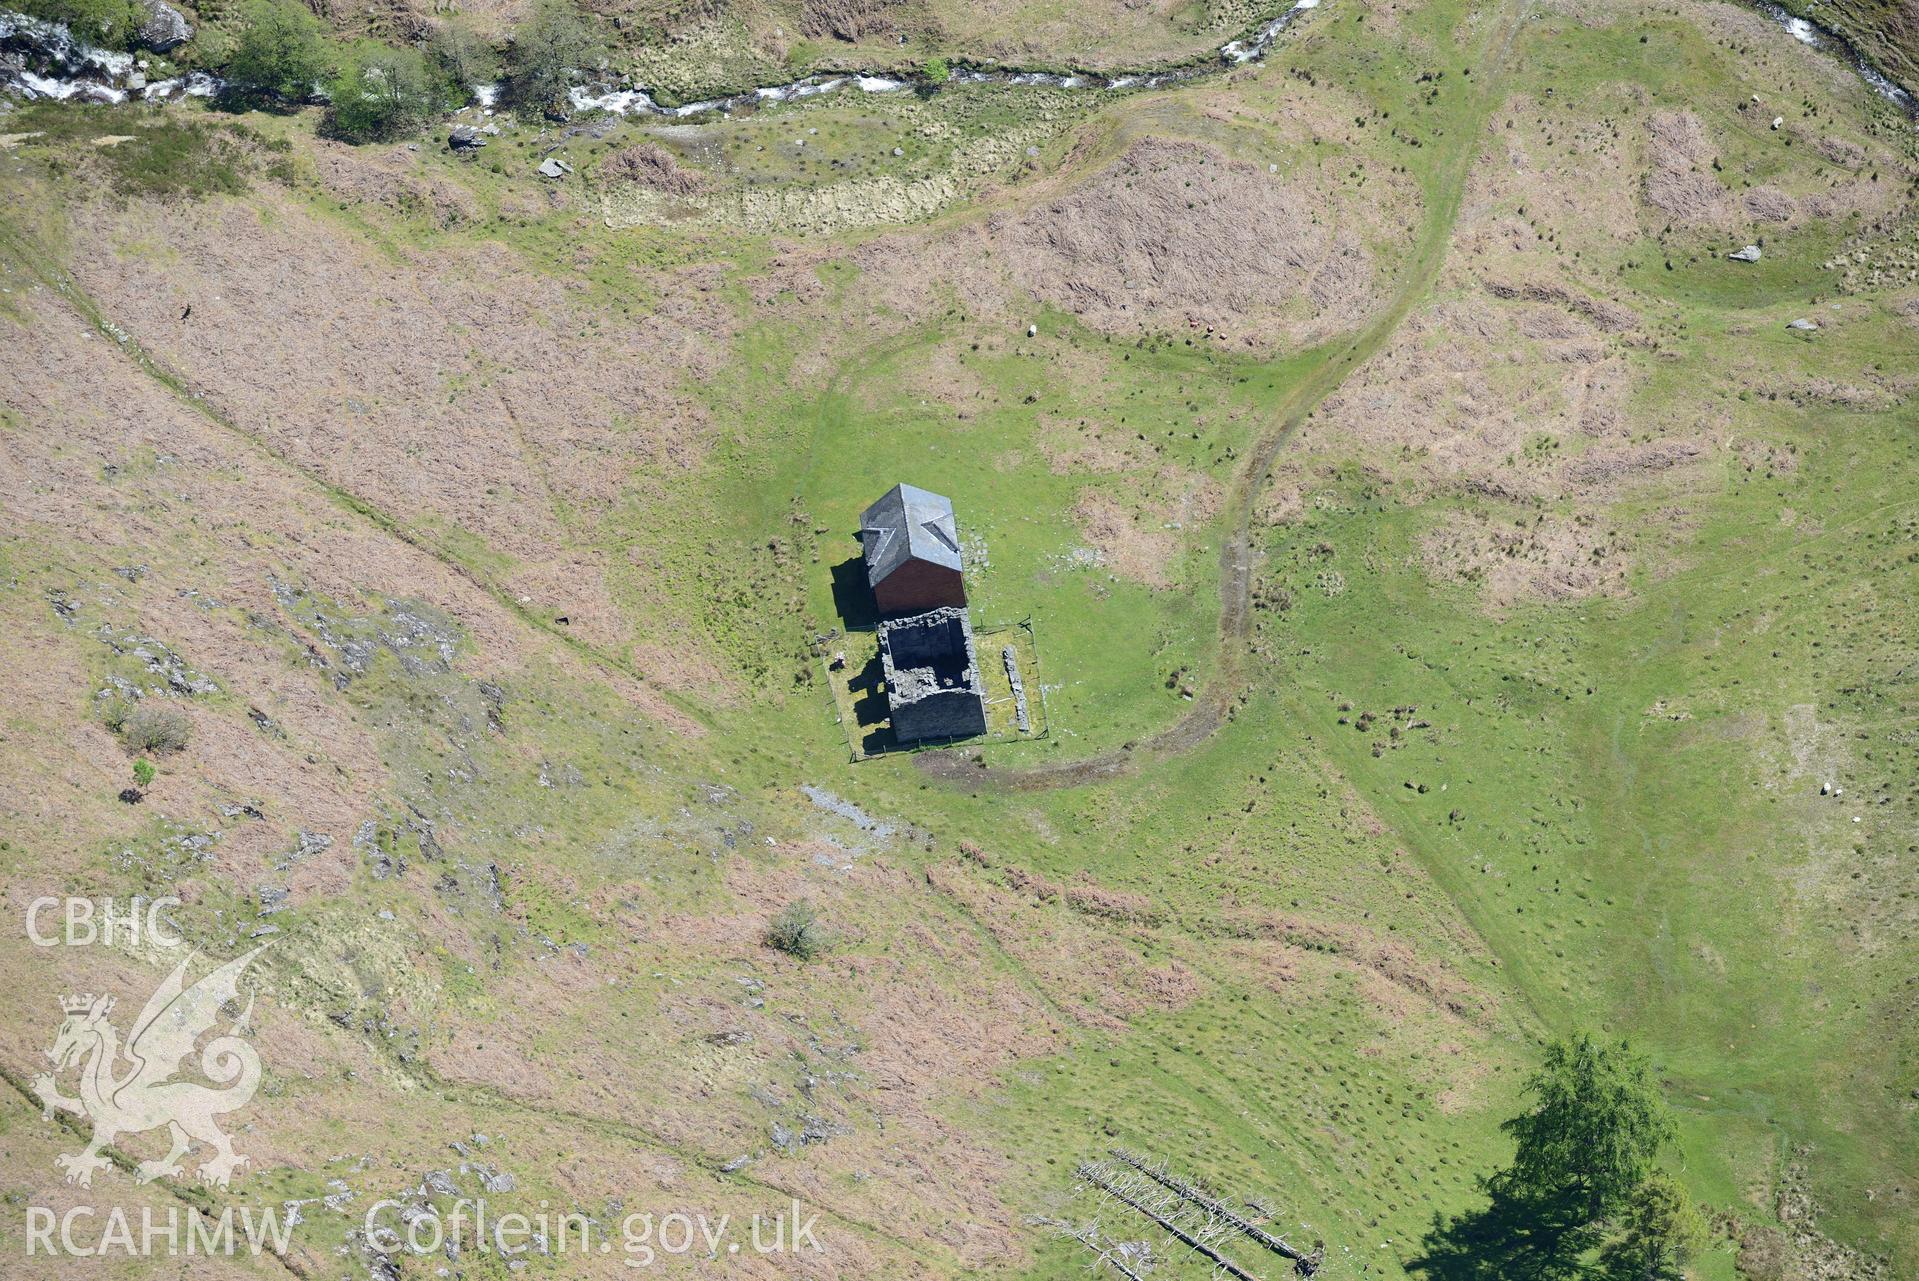 Cwm Elan lead mine complex, including the remains of mine house and Pengwaidd house and mine office. Oblique aerial photograph taken during the Royal Commission's programme of archaeological aerial reconnaissance by Toby Driver on 3rd June 2015.